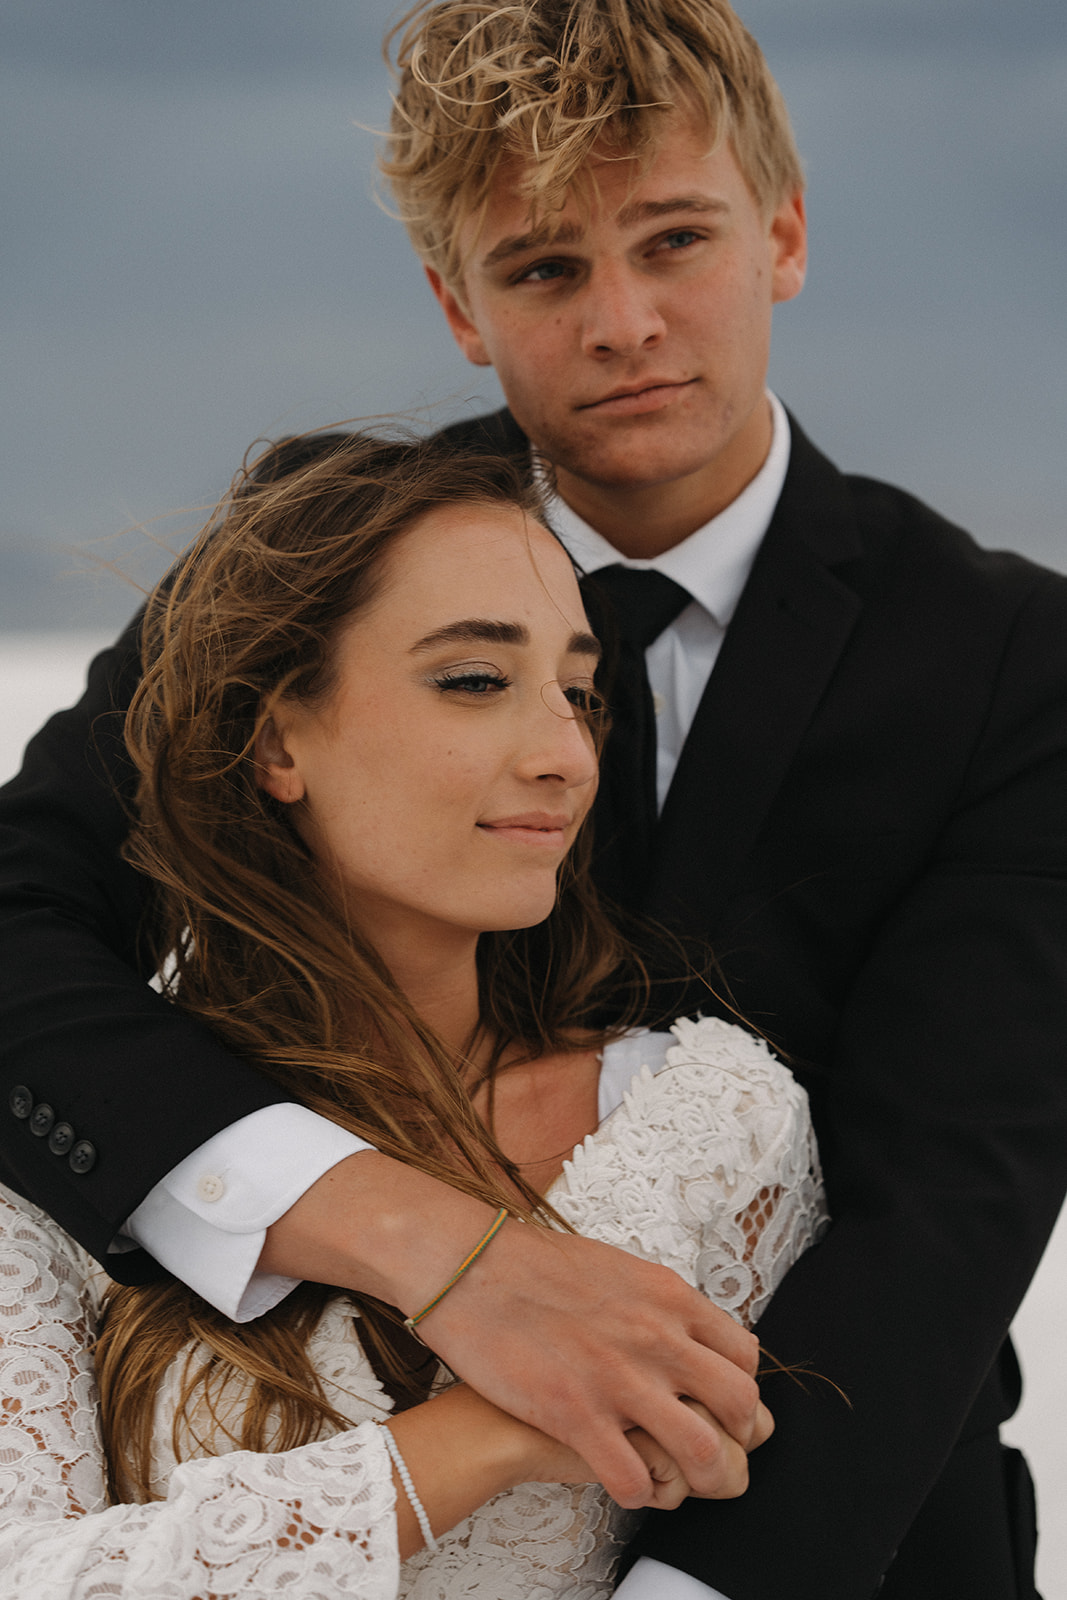 Newlyweds stand together hugging and holding hands on a windy day